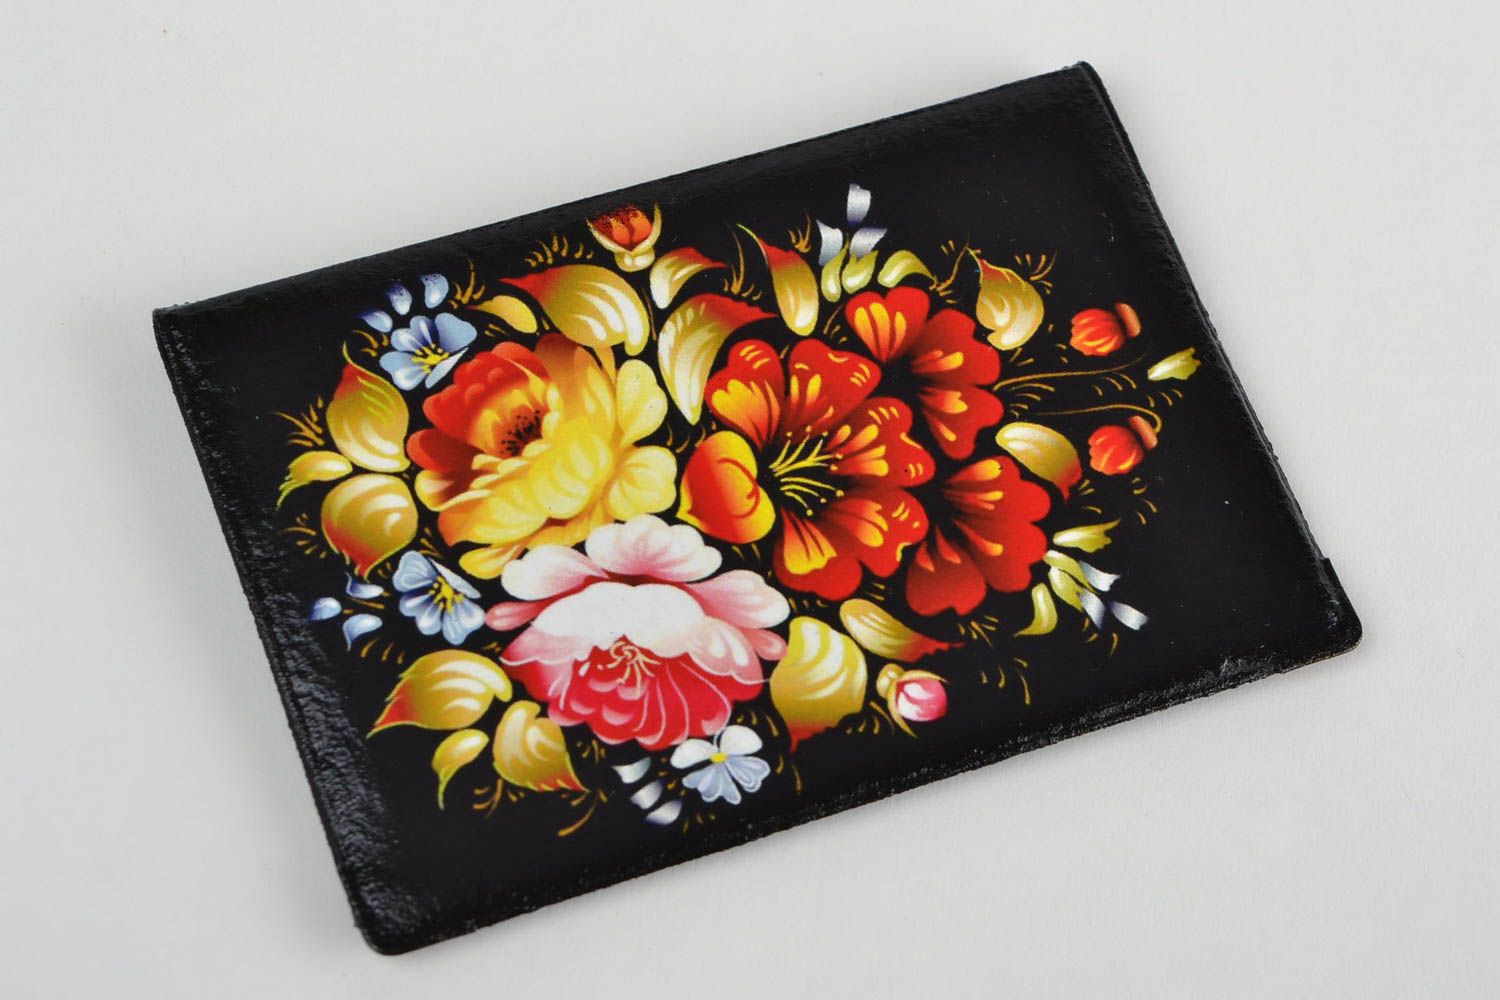 Handmade black faux leather passport cover with decoupage image bright flowers photo 4